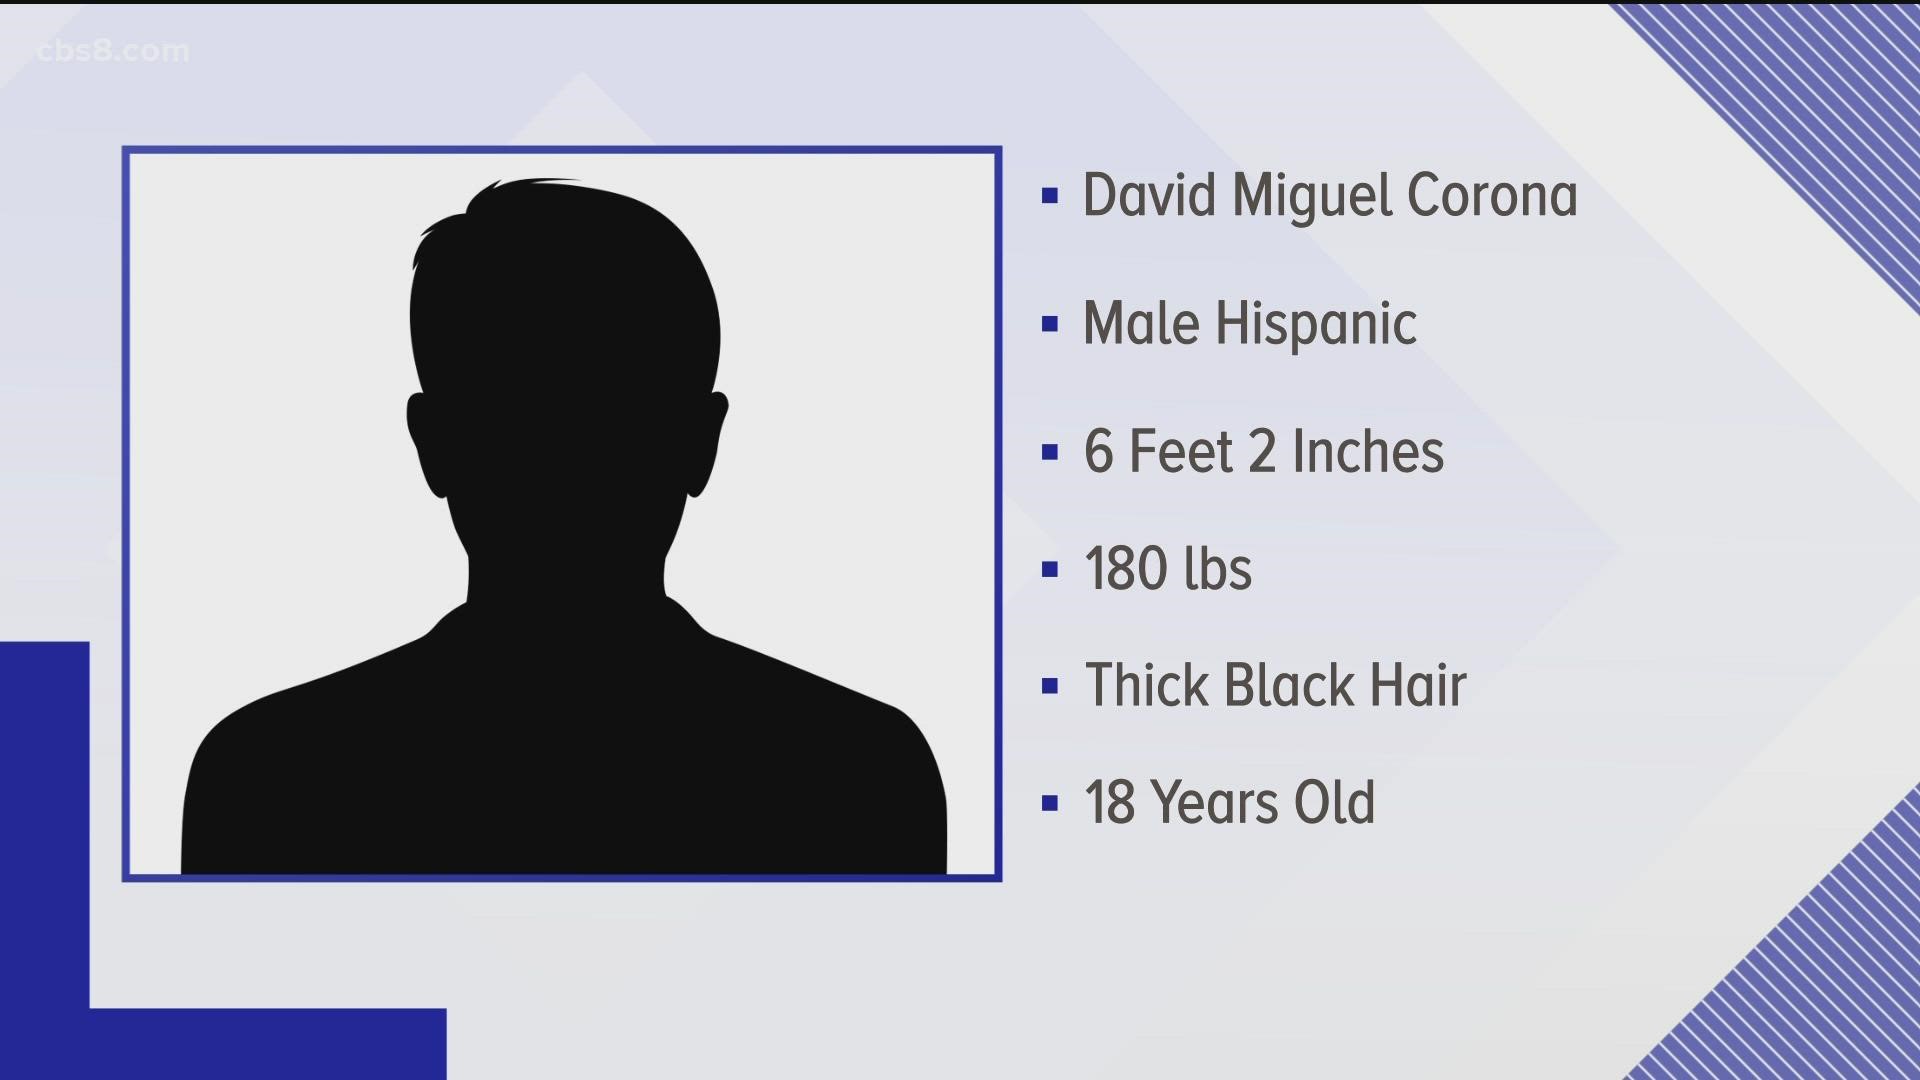 Investigators are seeking additional witnesses and possibly more victims after arresting David Miguel Corona for lewd and lascivious acts on a child under 14.